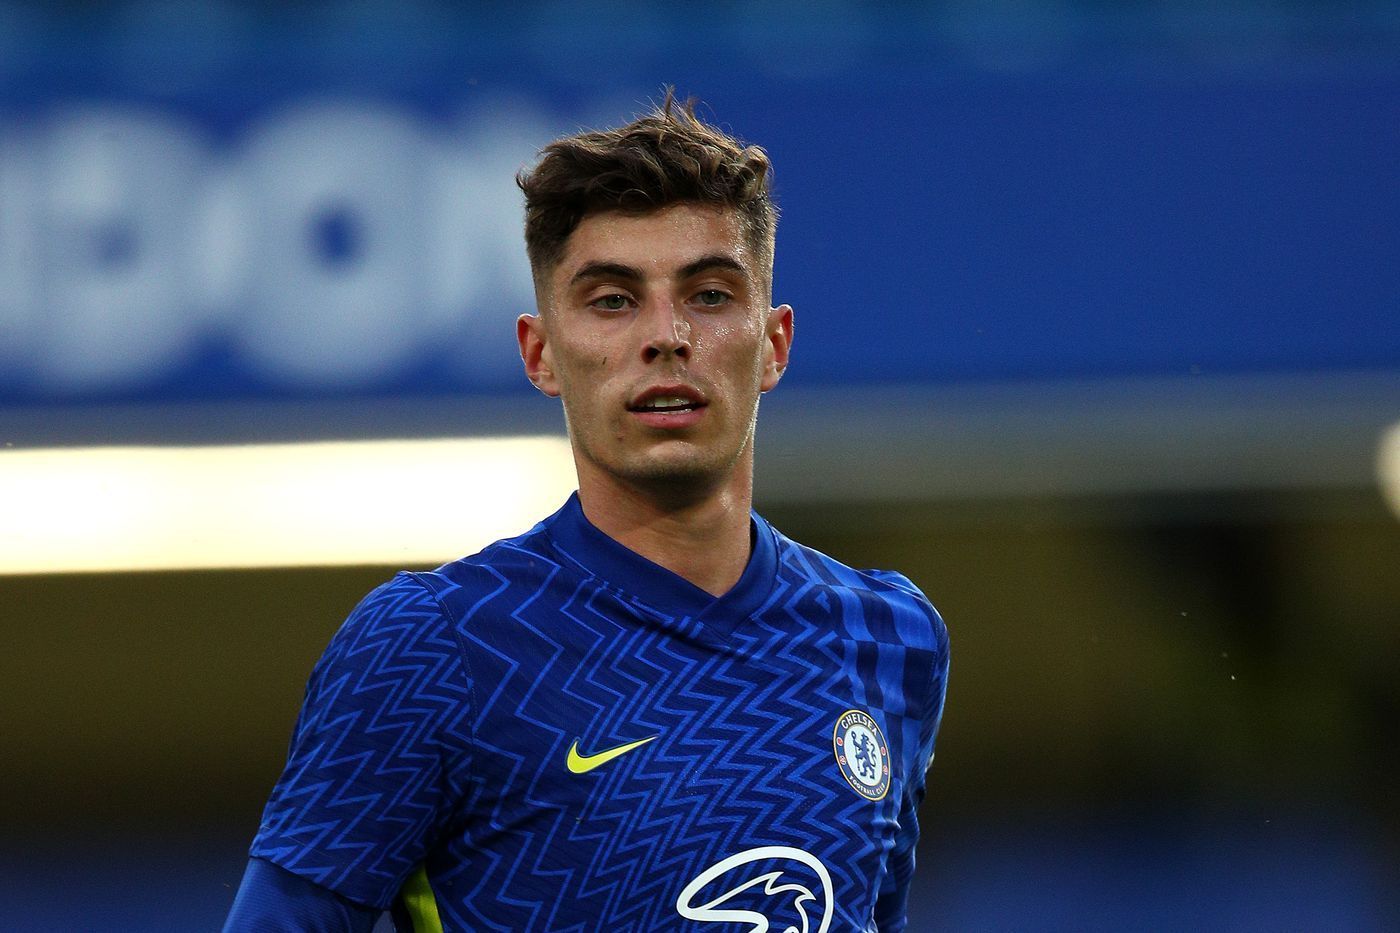 Can Havertz reward the FPL managers who brought him in, albeit a GW later?